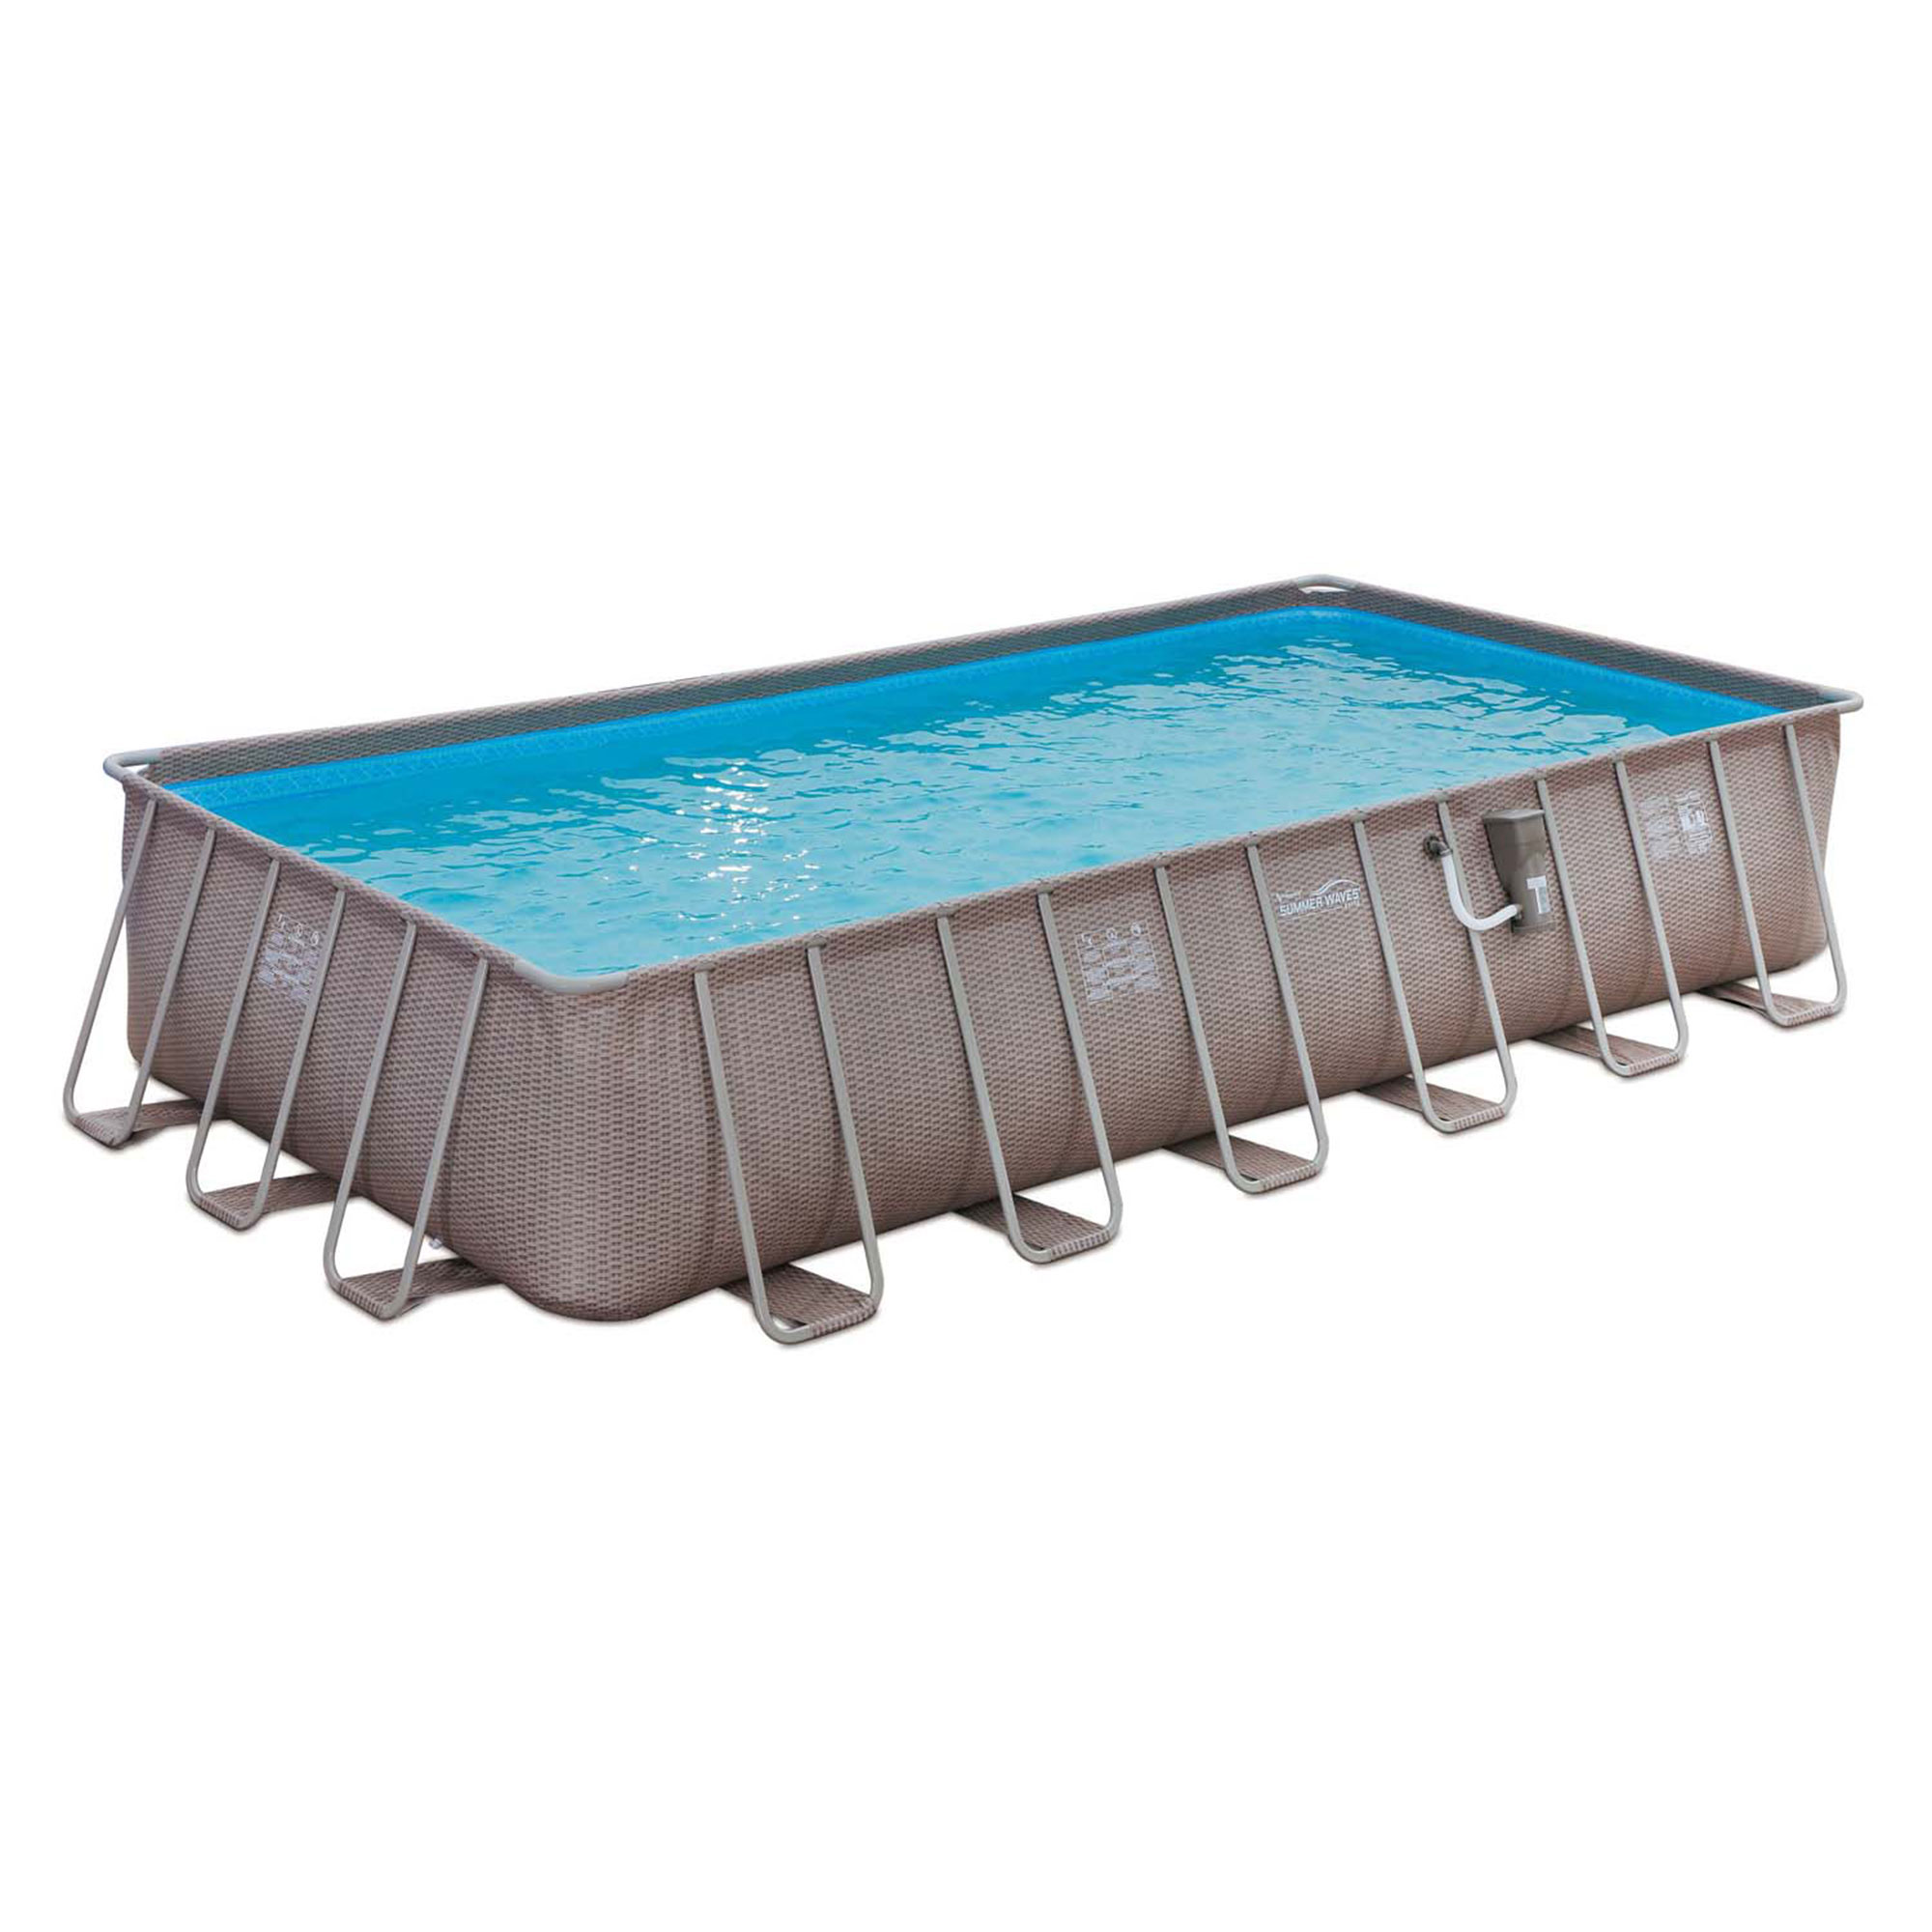 Summer Waves 24 x 12 x 4.5' Rectangle Above Ground Frame Swimming Pool Set - image 1 of 7